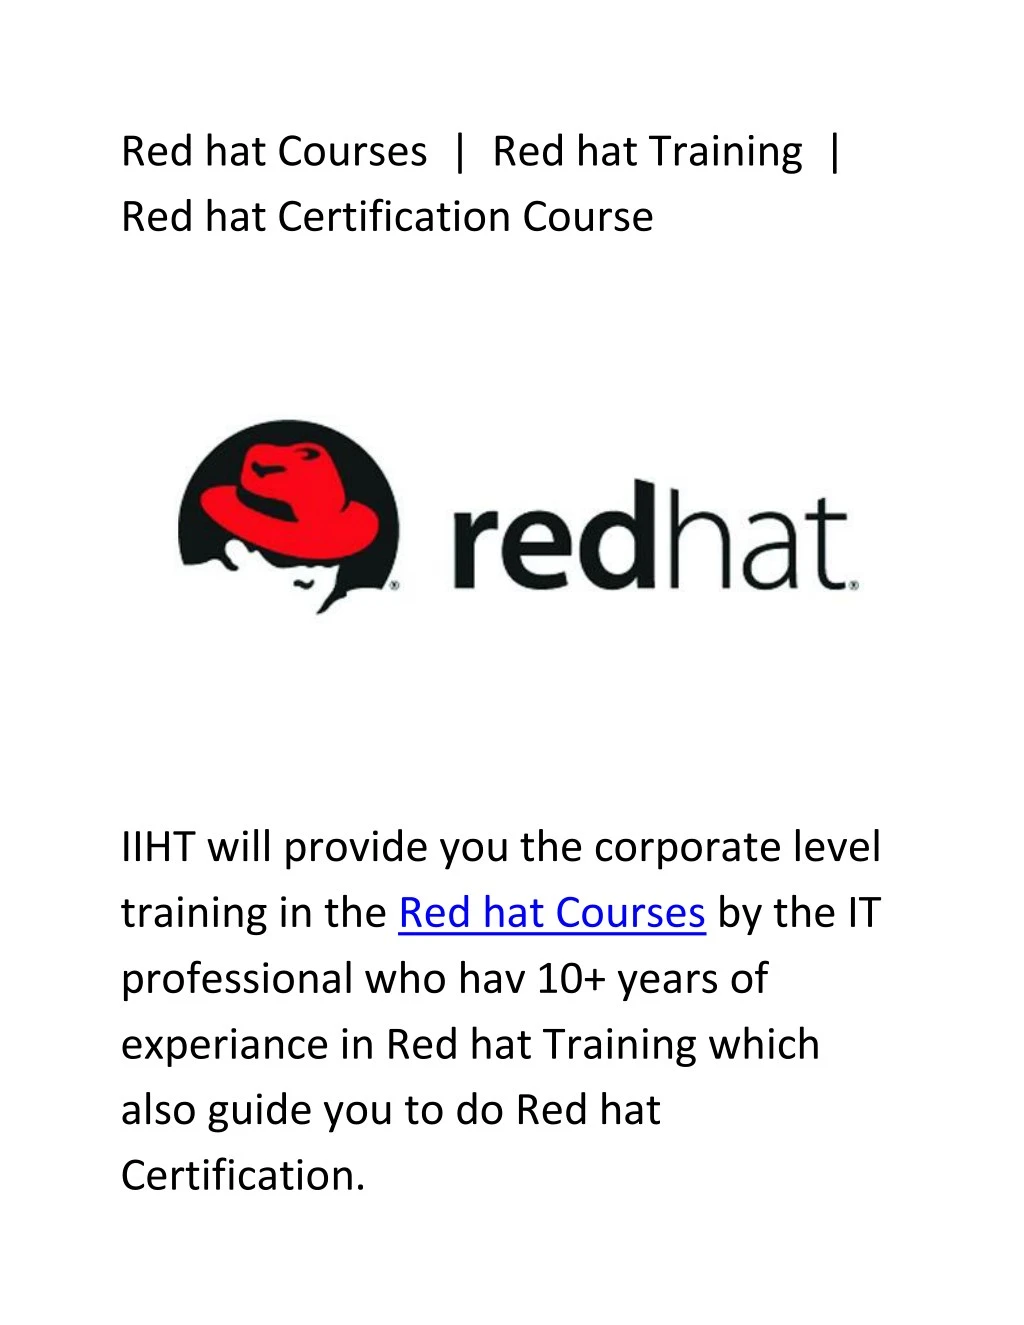 red hat courses red hat training